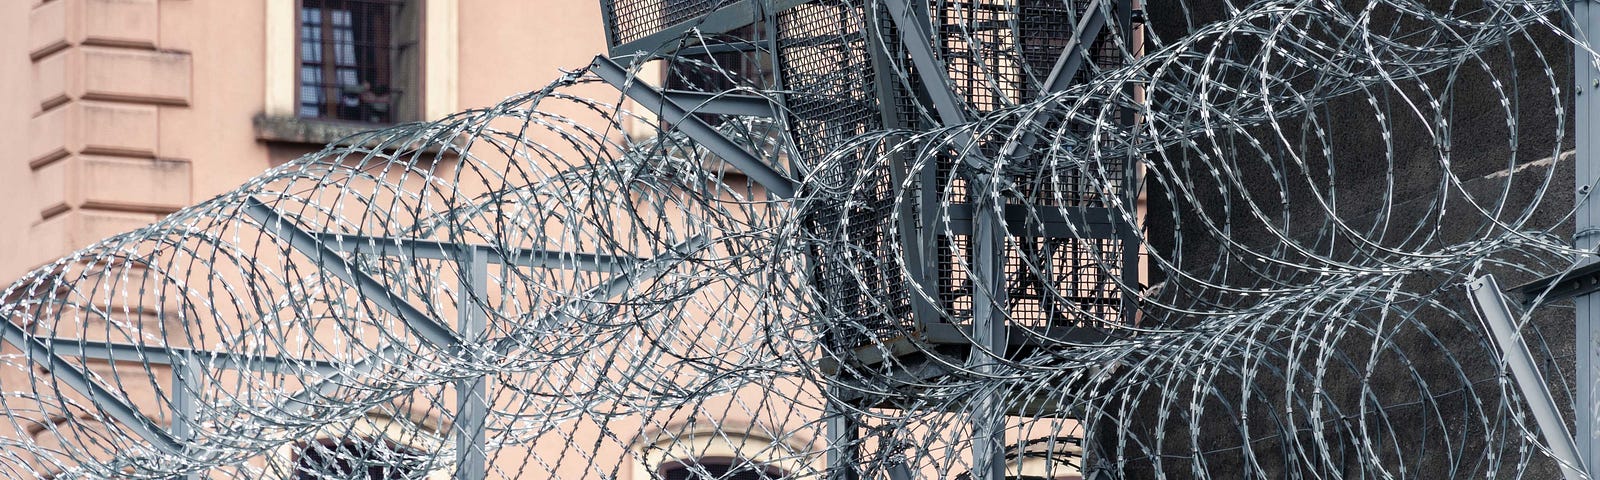 A close-up of the top of a barbed-wire fence.